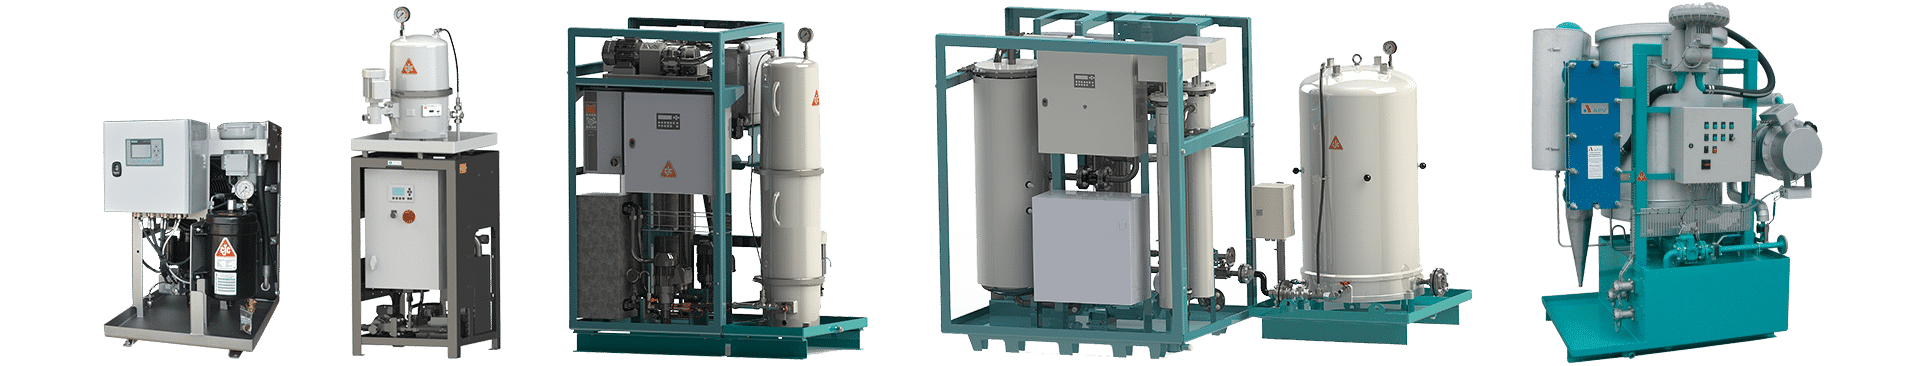 Desorber Filter Unit D10, minimize free and dissolved water